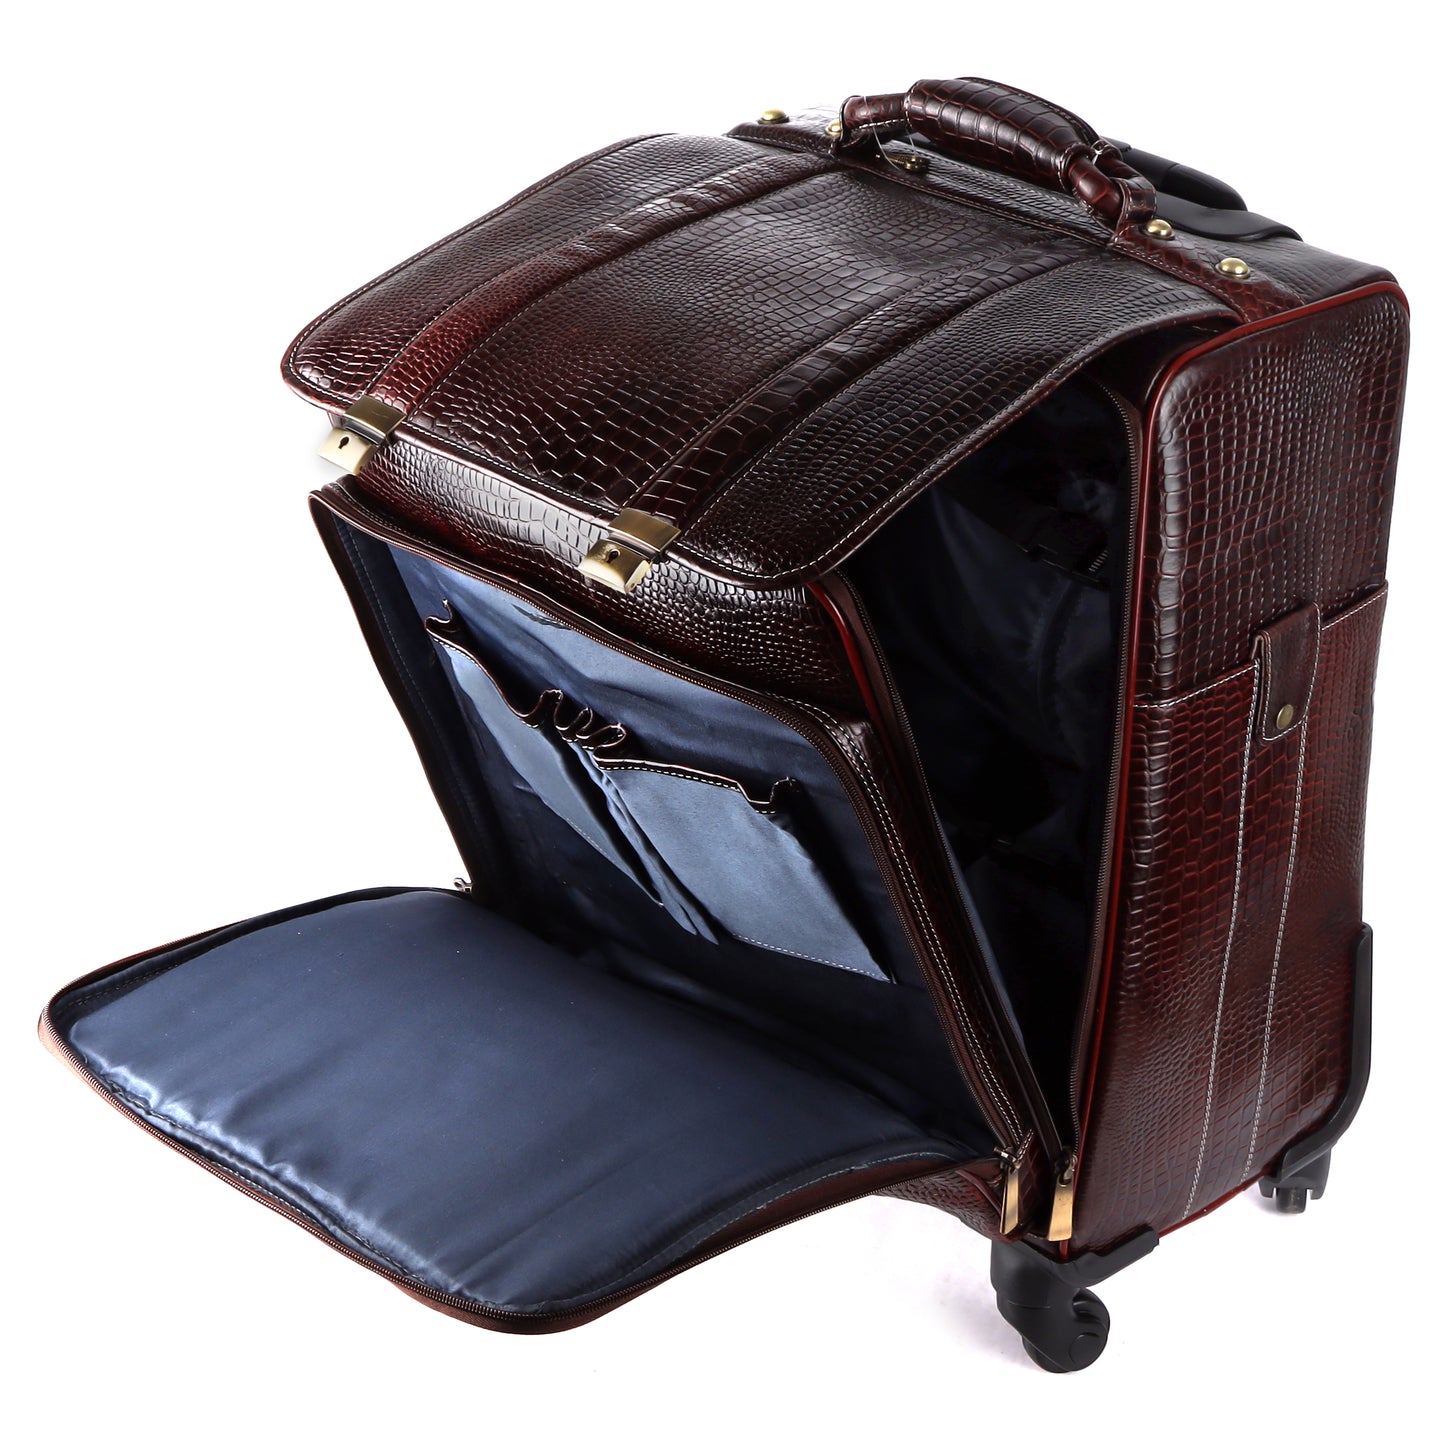 Brown Leather Trolley Bag for Flight Leather Weekender Leather Luggage with Wheels